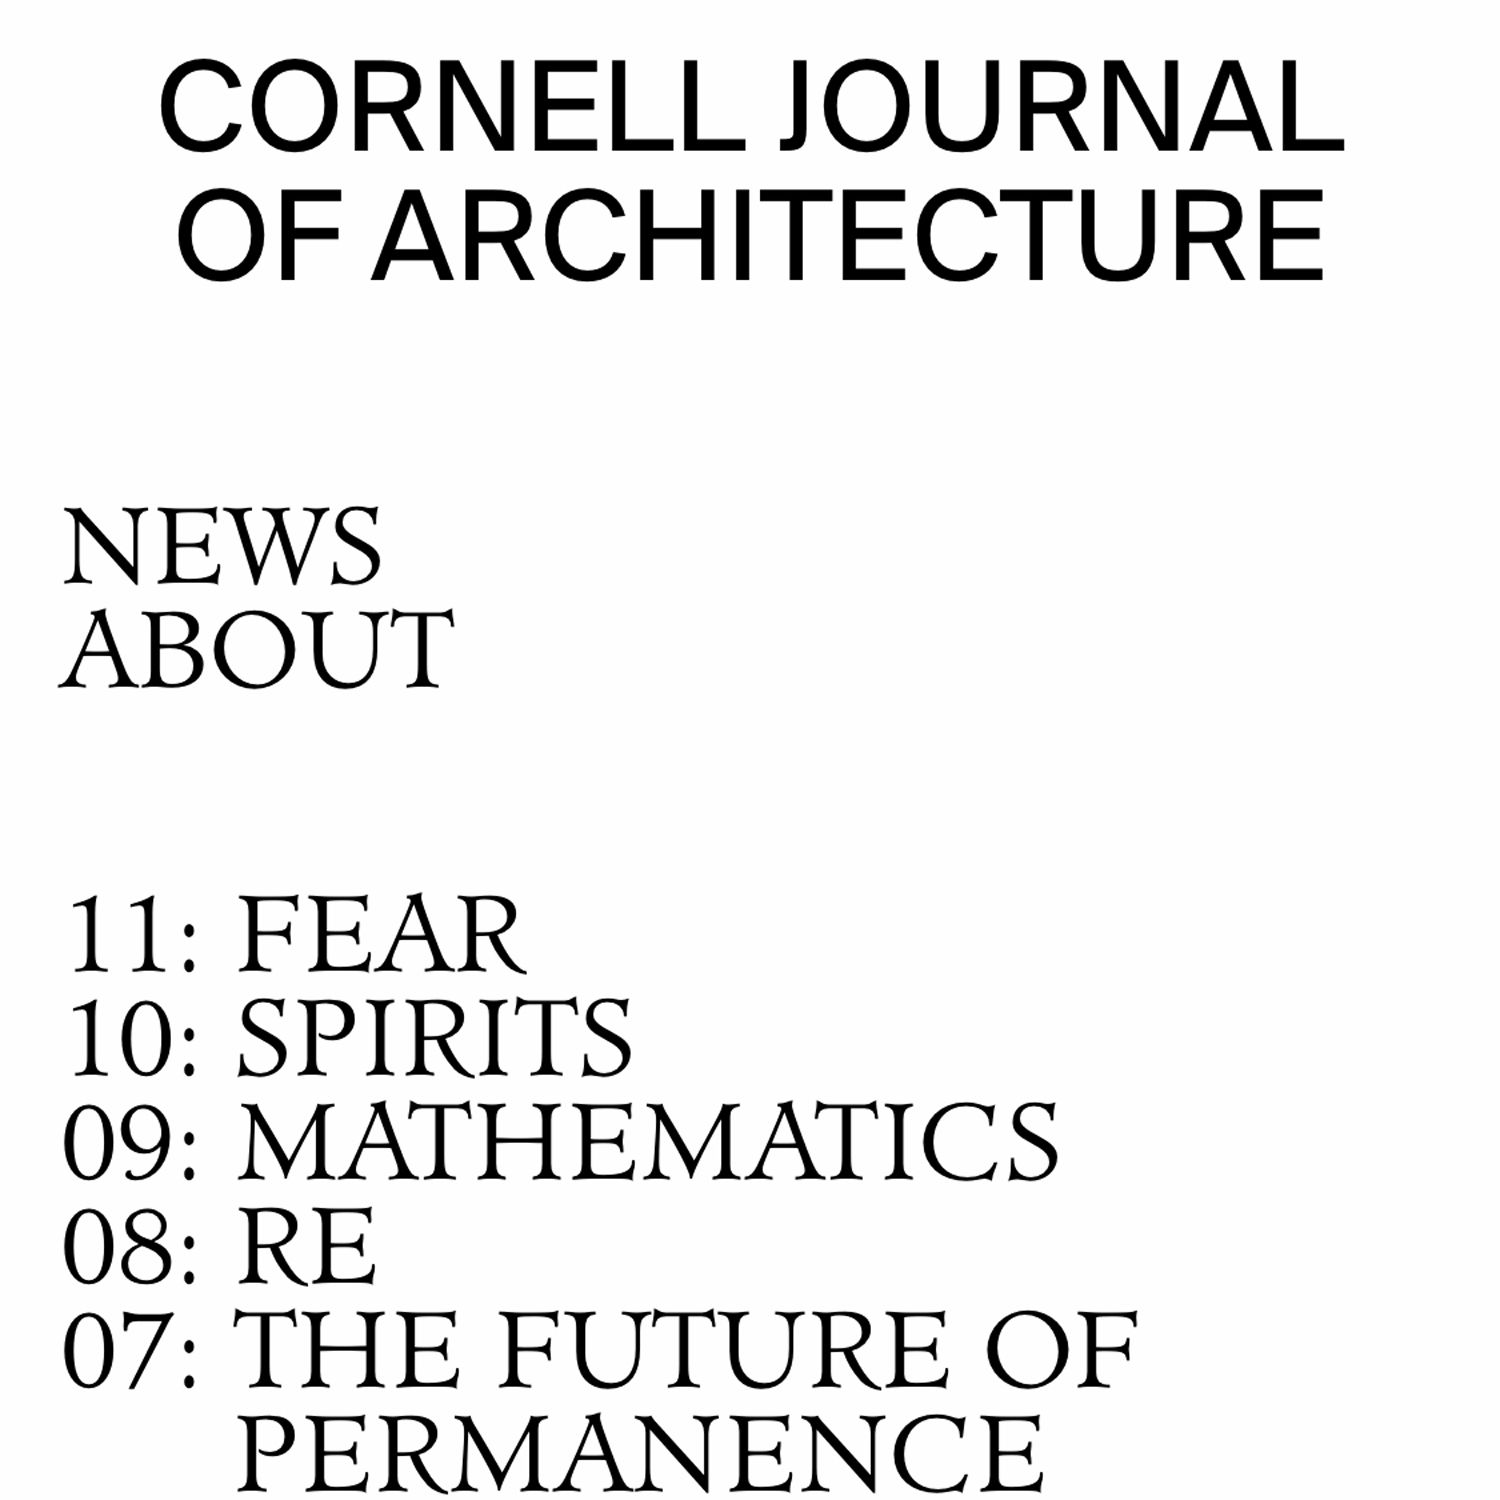 Cornell Journal of Architecture website